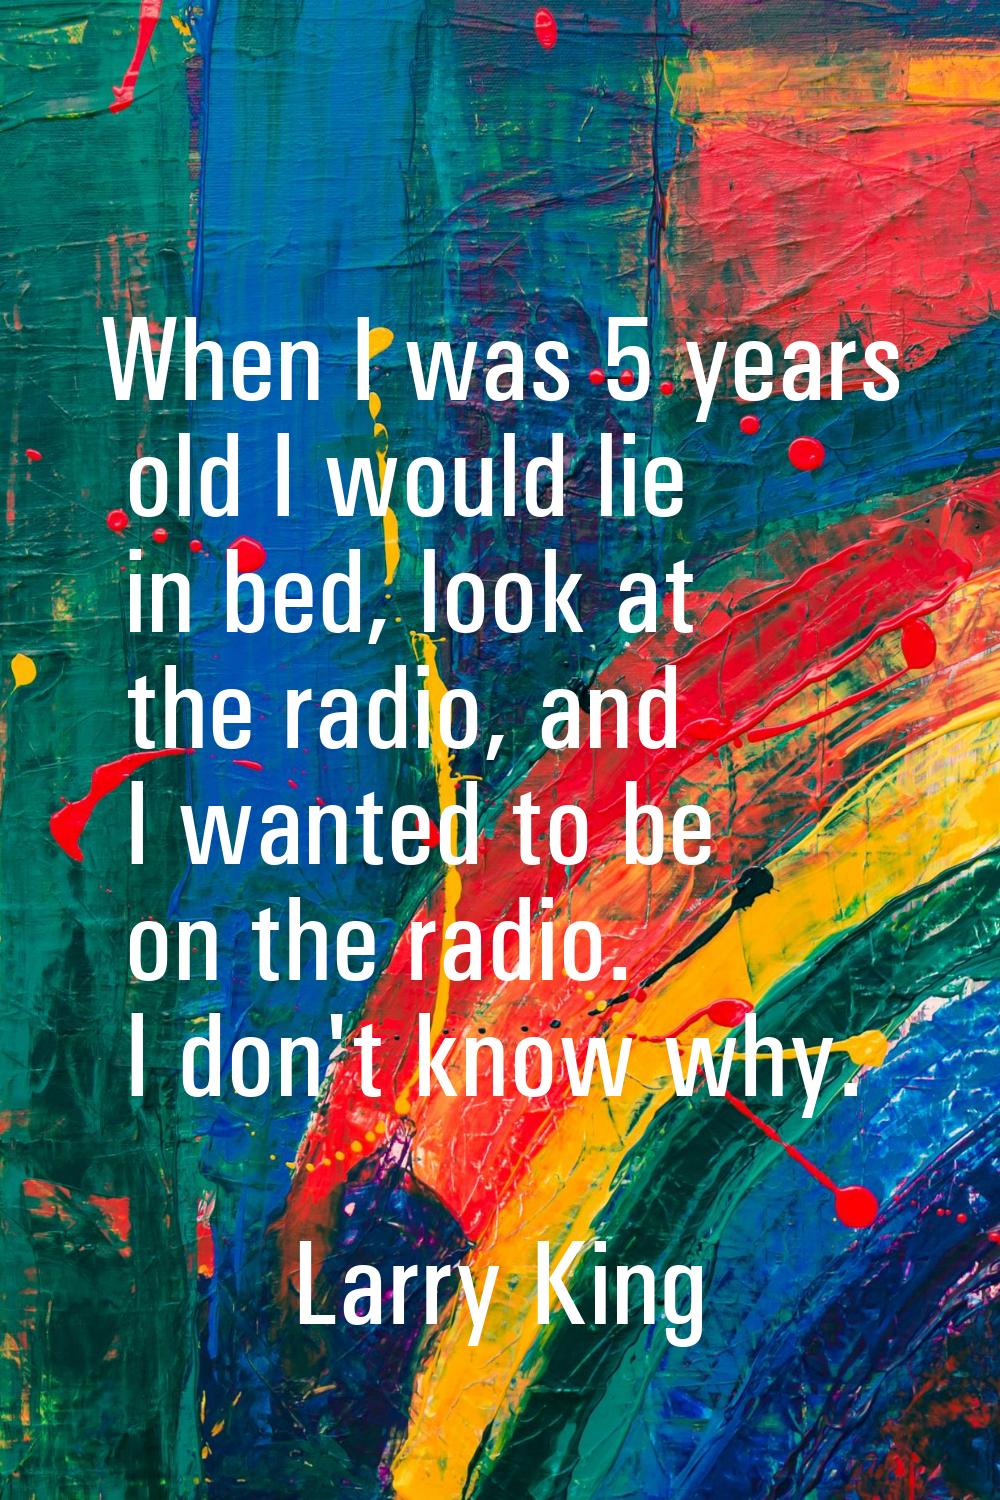 When I was 5 years old I would lie in bed, look at the radio, and I wanted to be on the radio. I do